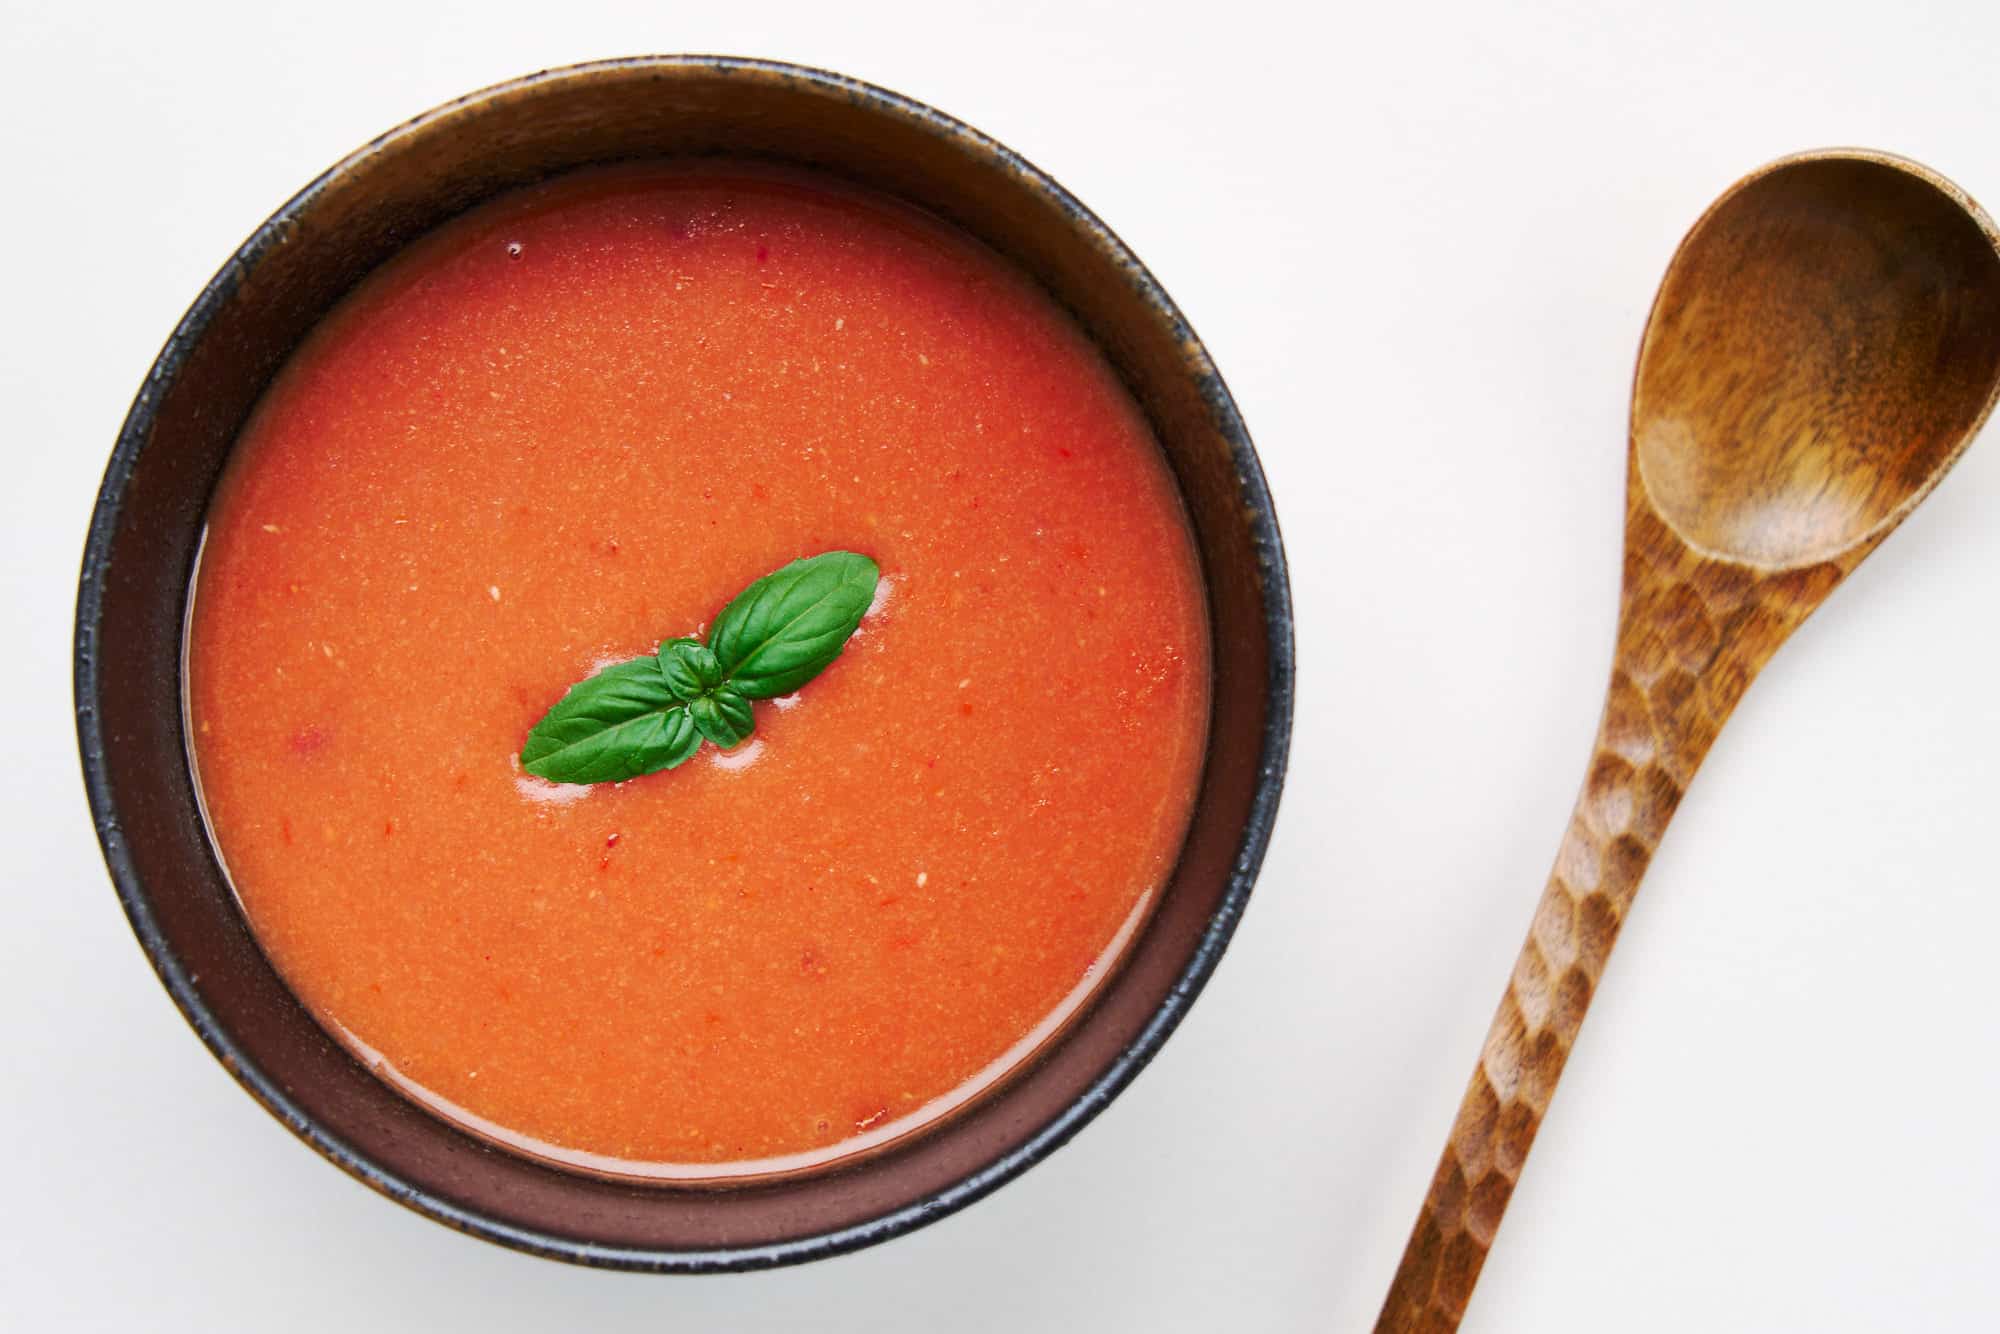 An artful balance of creamy and tangy, the Tomato Rice Soup, cradled in a dark earthenware bowl.